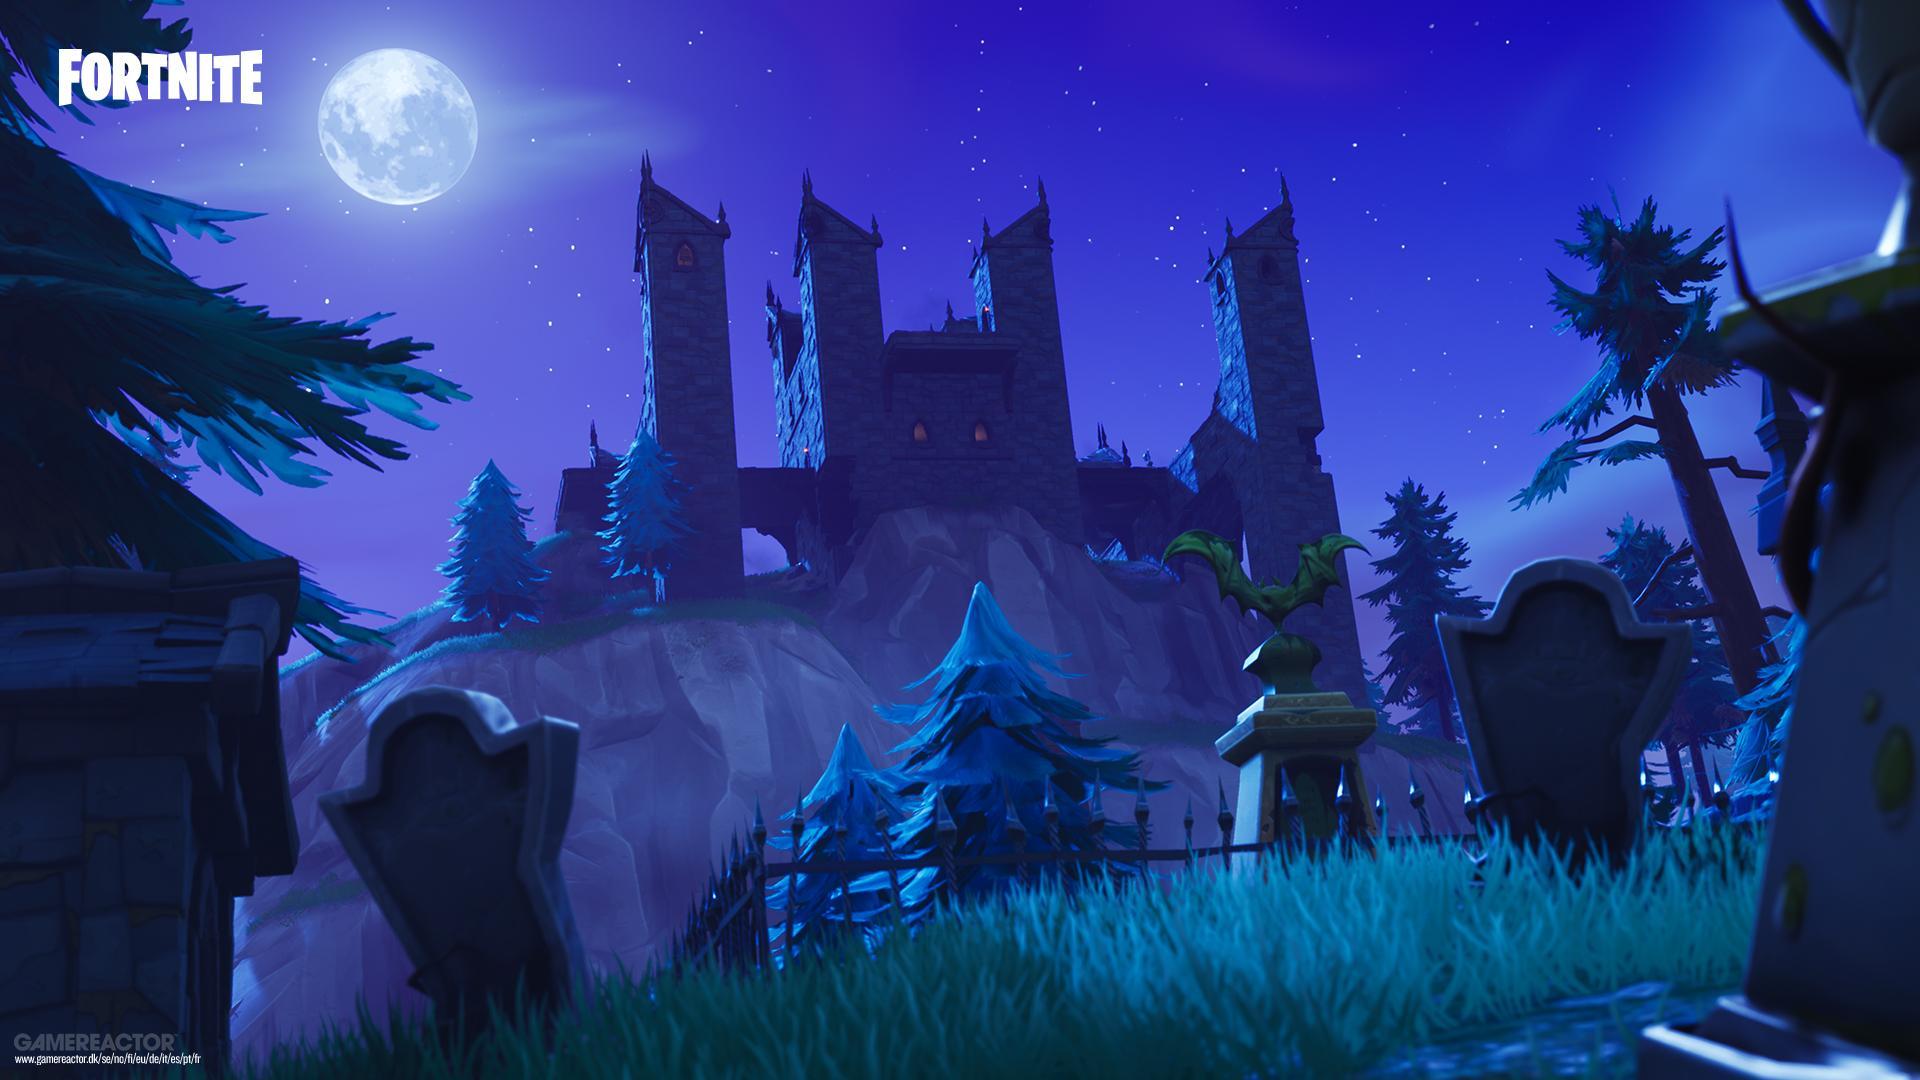 Picture of Fortnite Season 6 contains loads of sweet